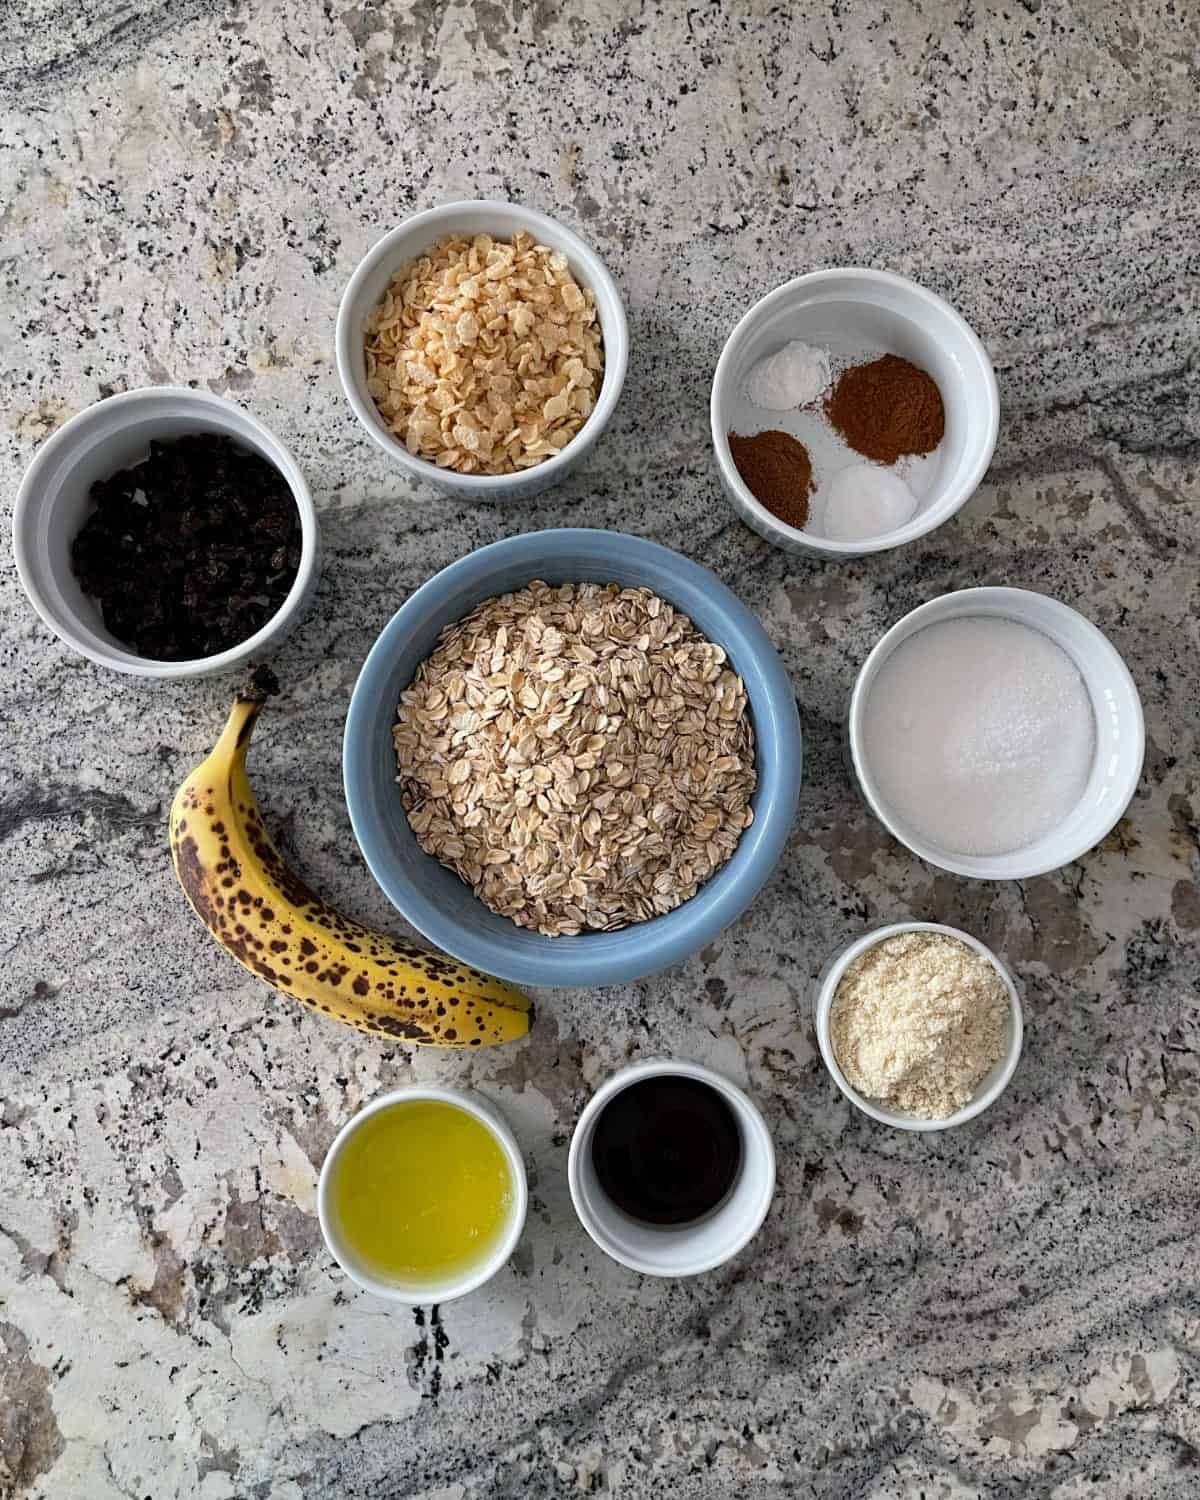 Ingredients including rolled oats, crispy rice cereal, raisins, banana, almond flour, canola oil, molasses, Truvia Baking Blend, ground cinnamon and nutmeg.